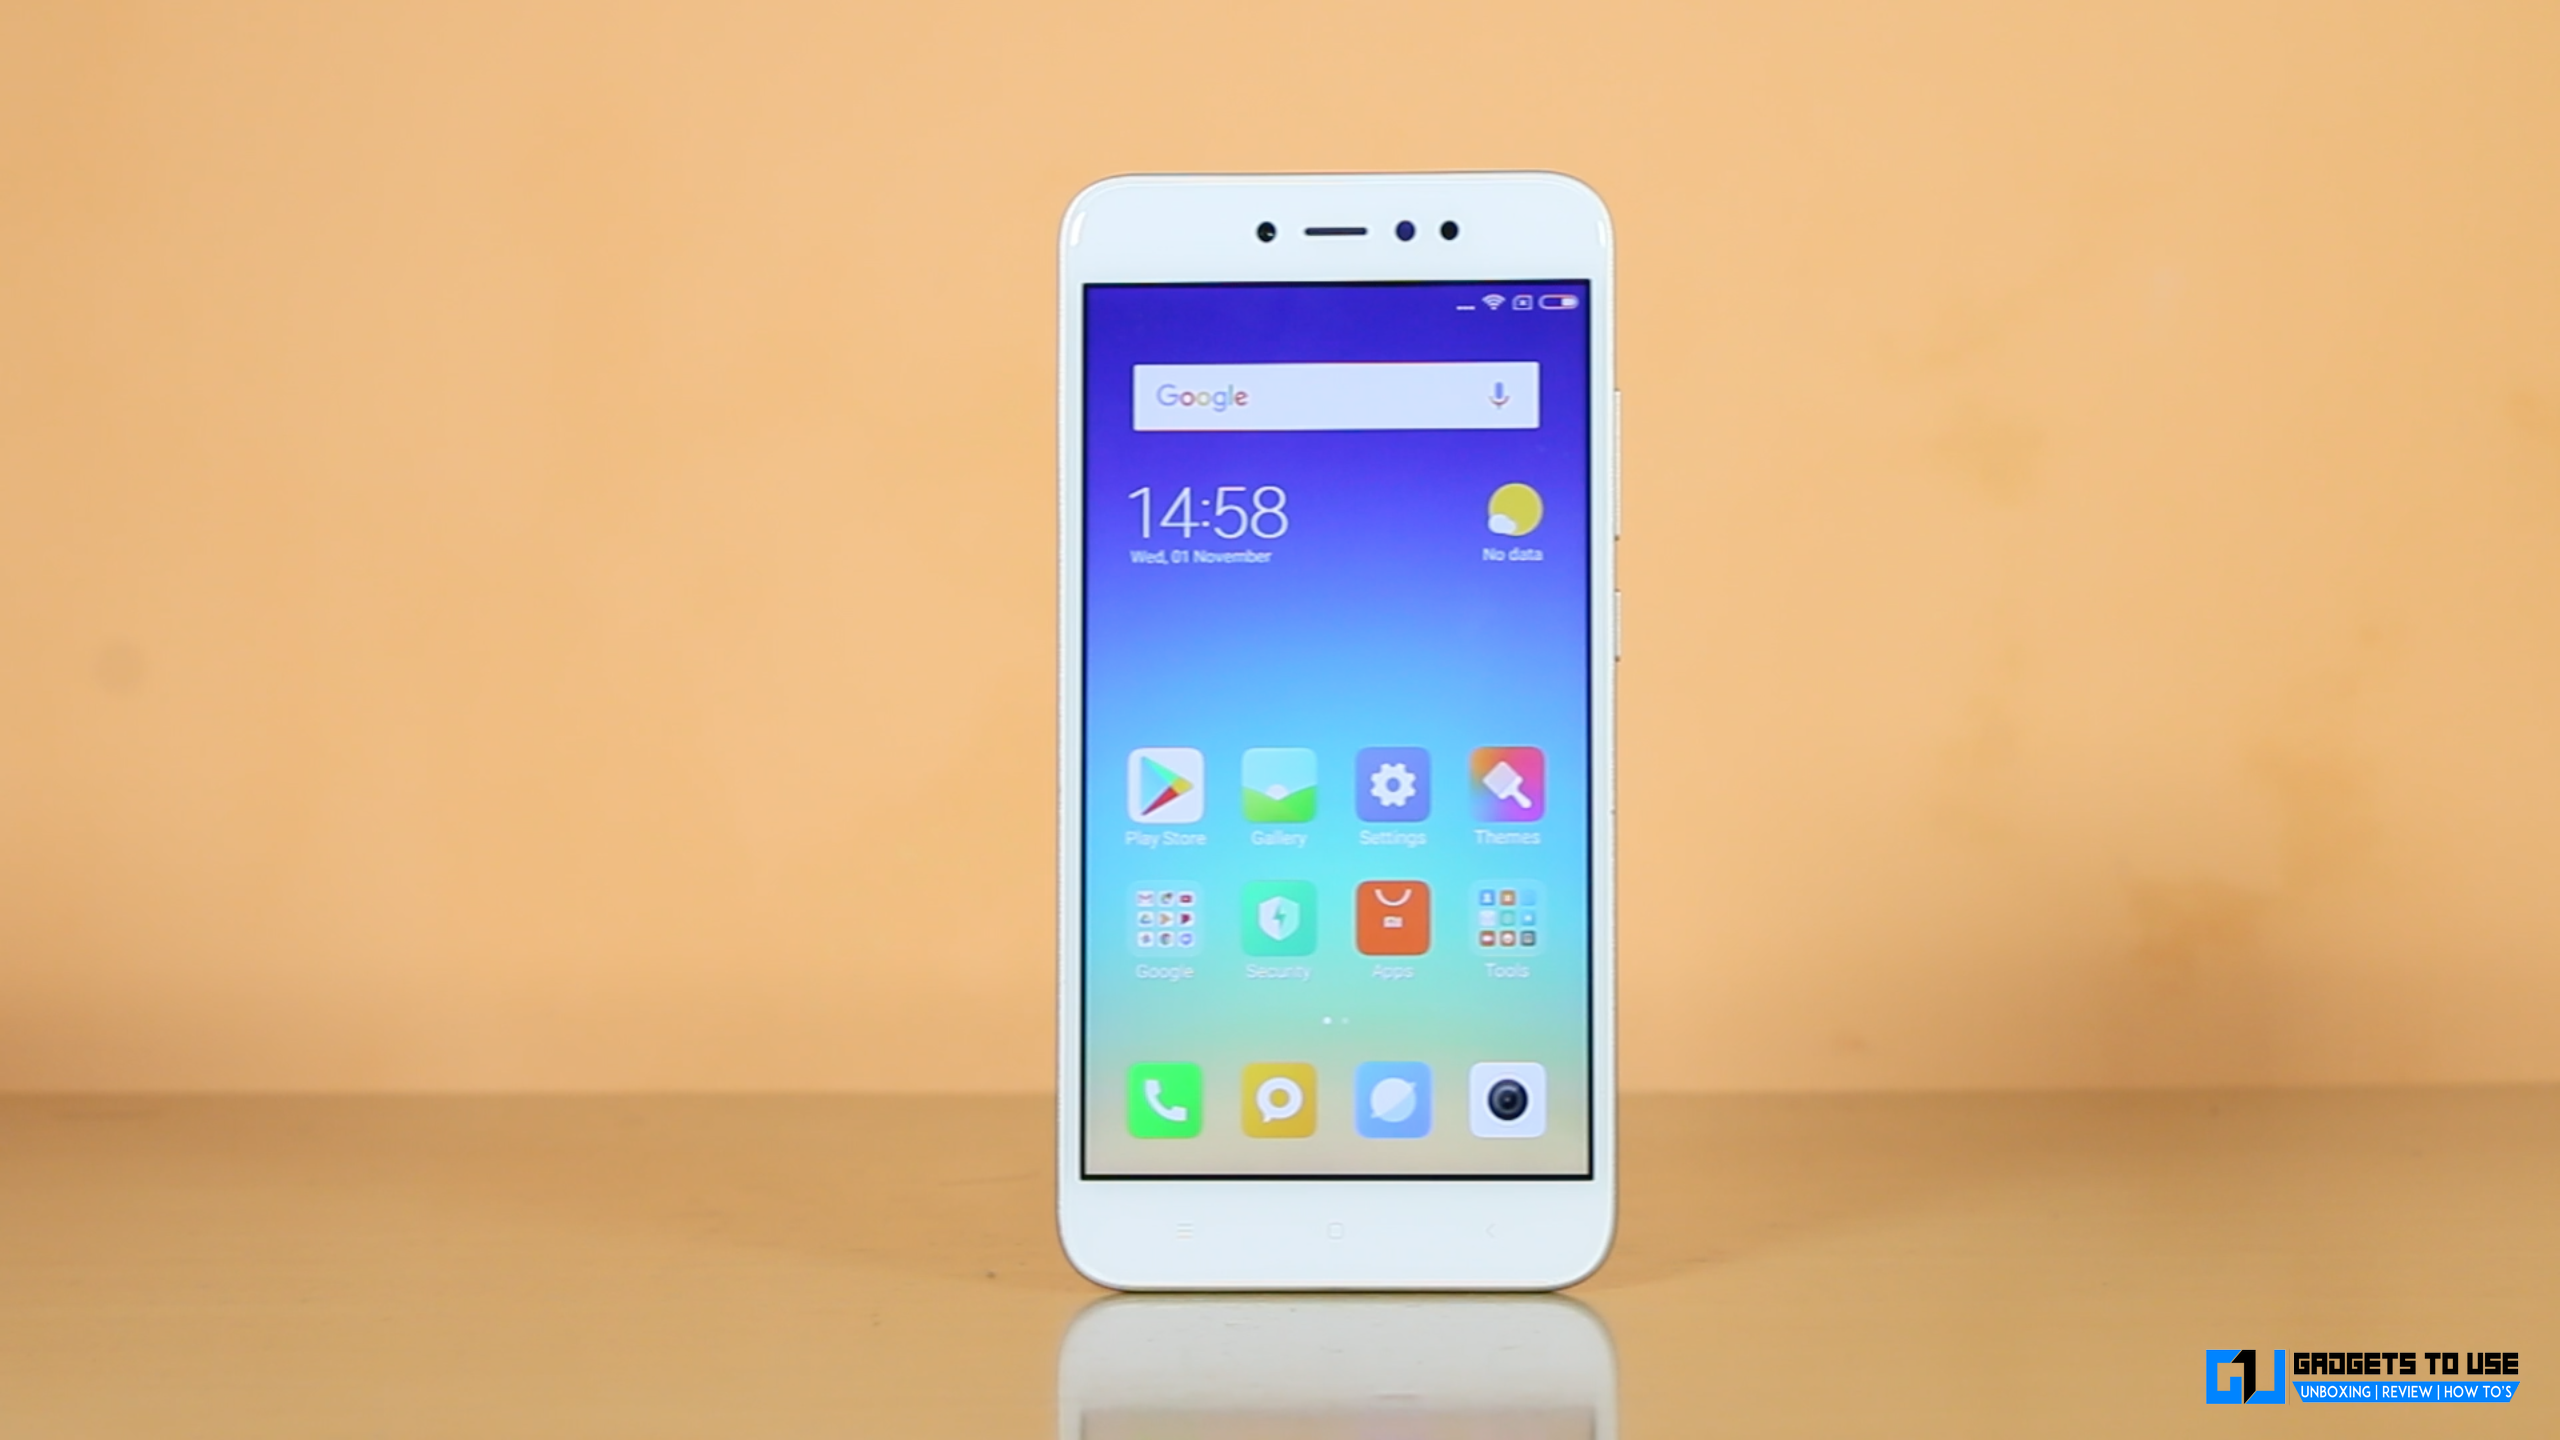 Xiaomi Redmi Y1 and Redmi Y1 Lite launched: Specs, price and more